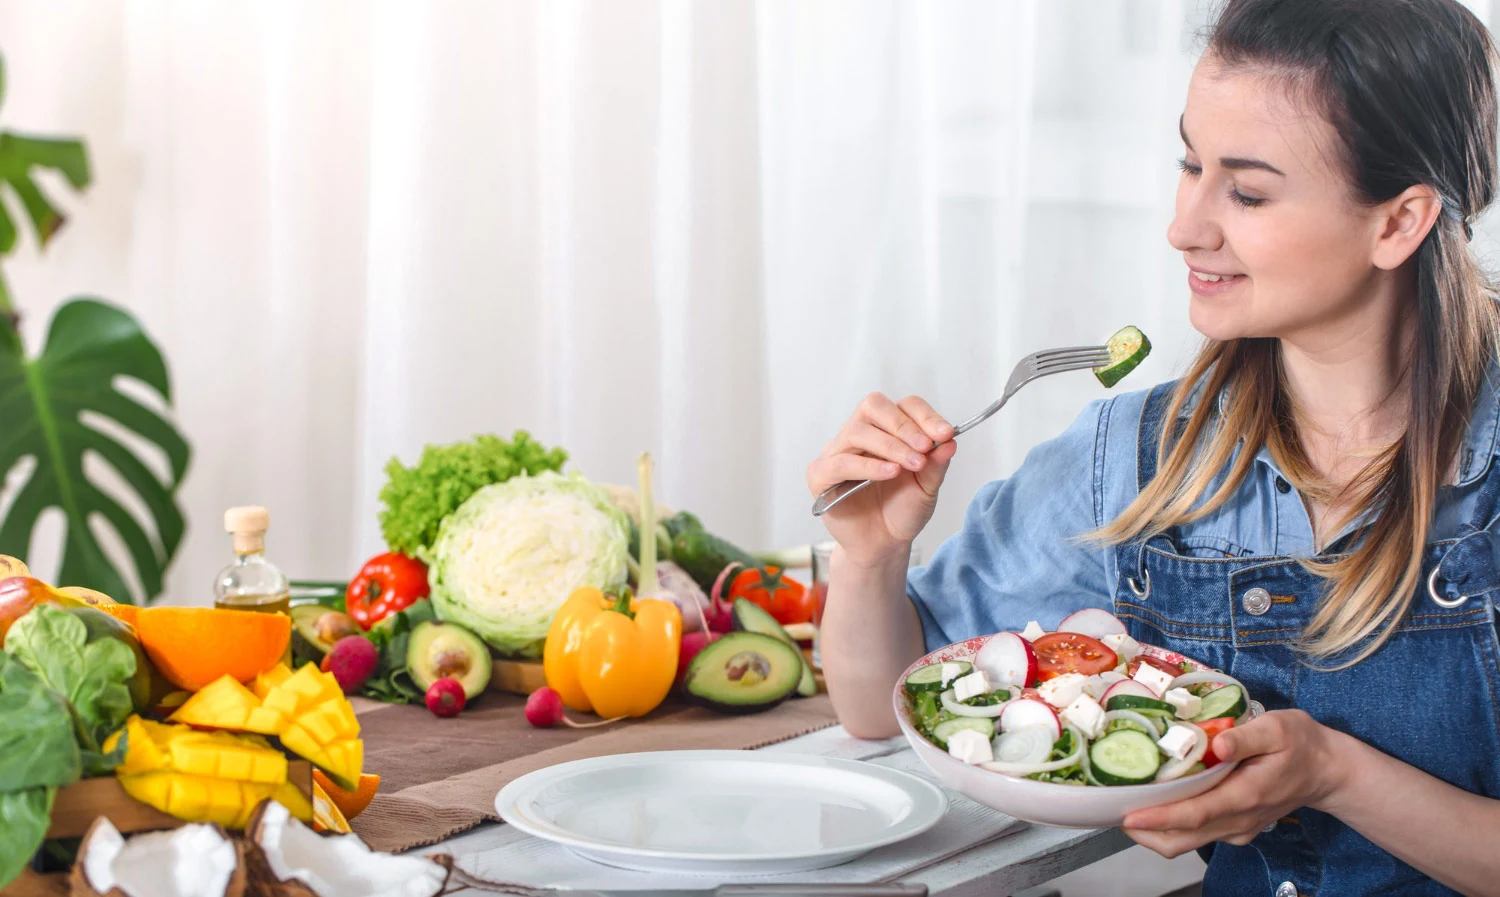 young-happy-woman-eating-salad-organic-vegetables-Eating-healthy-diet-help-reduce-stress-anxiety